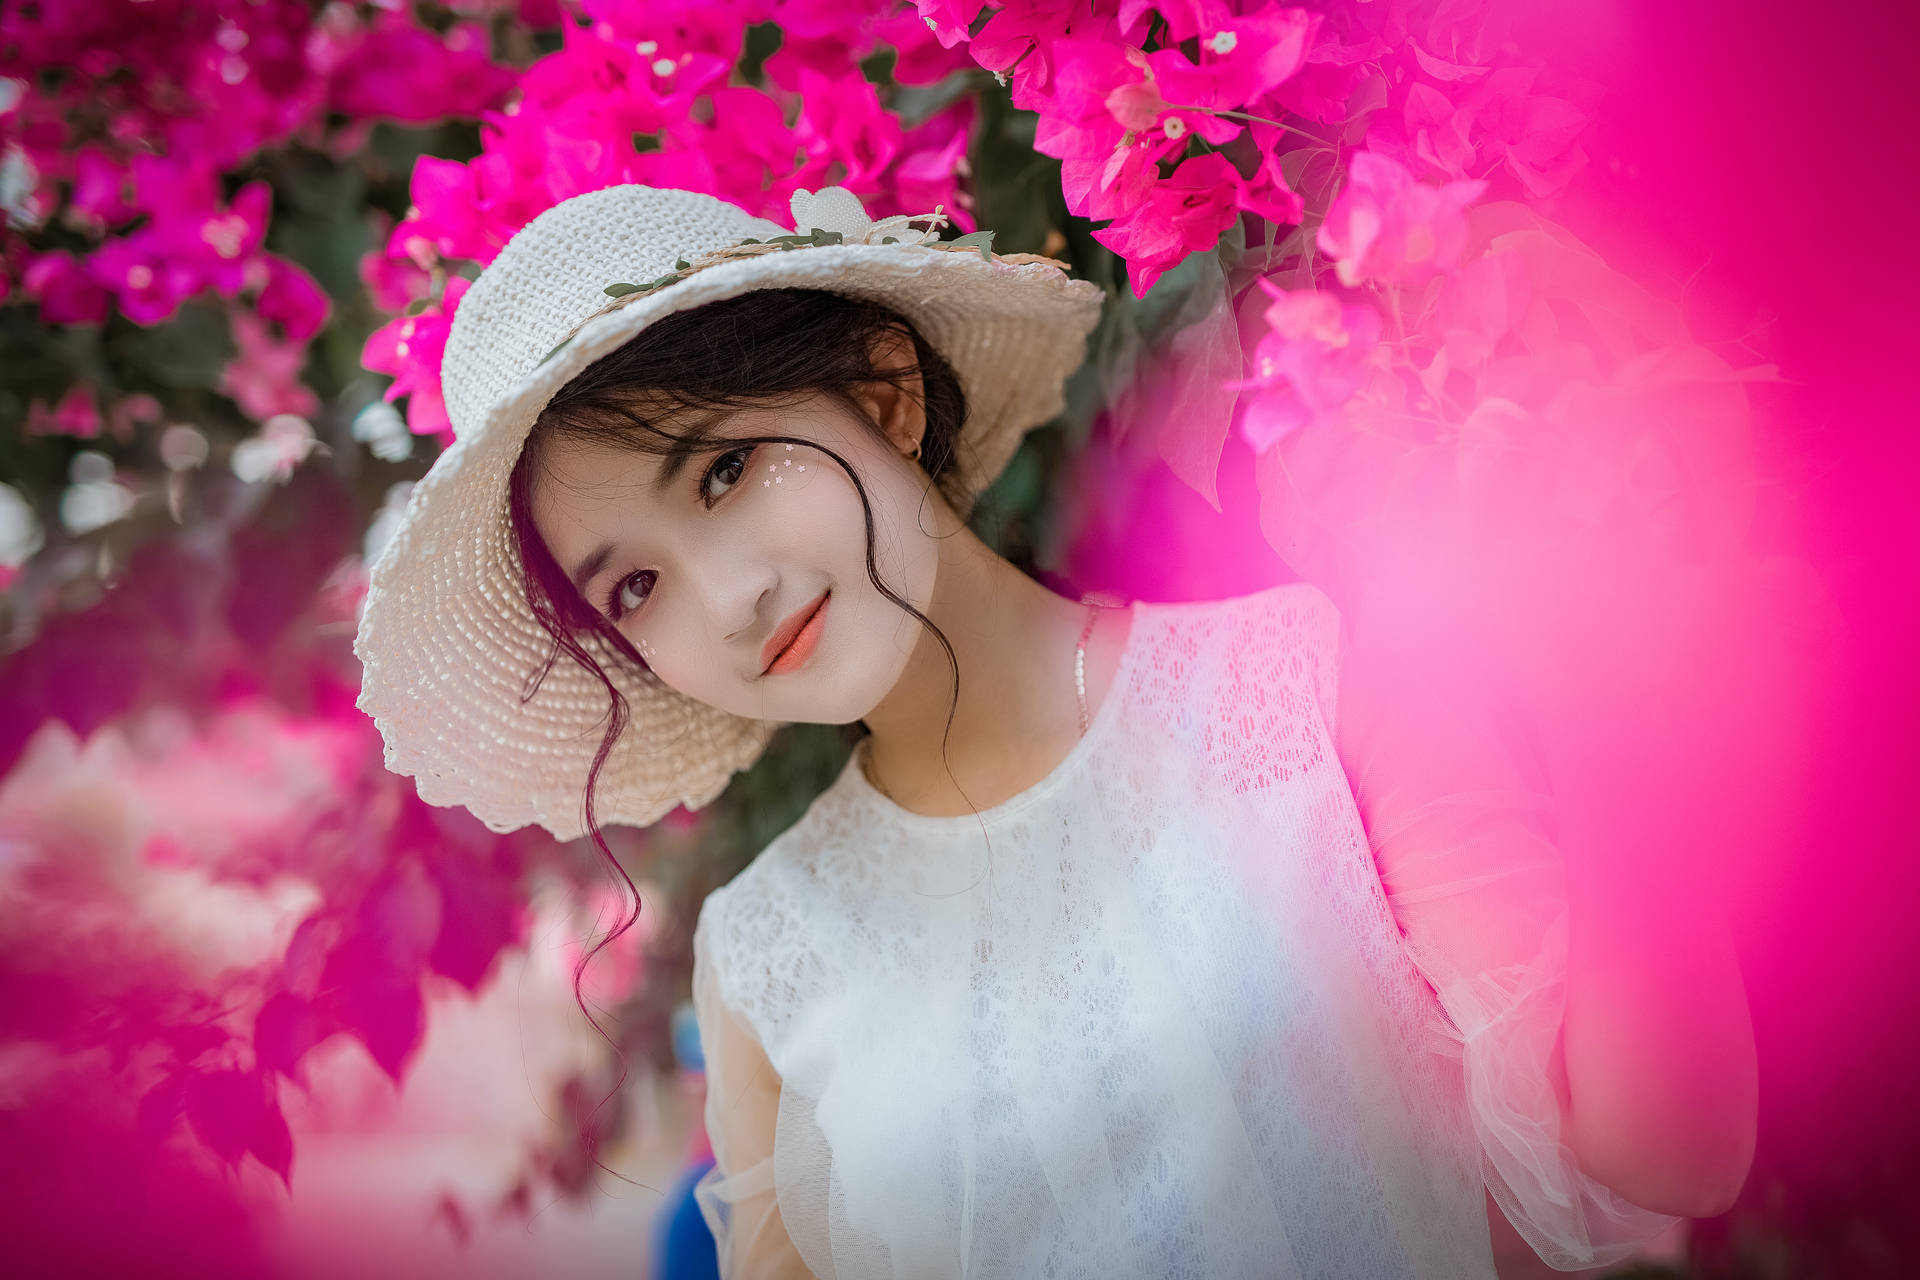 Elegance In Nature - Adorable Girl With Floral Hat Background